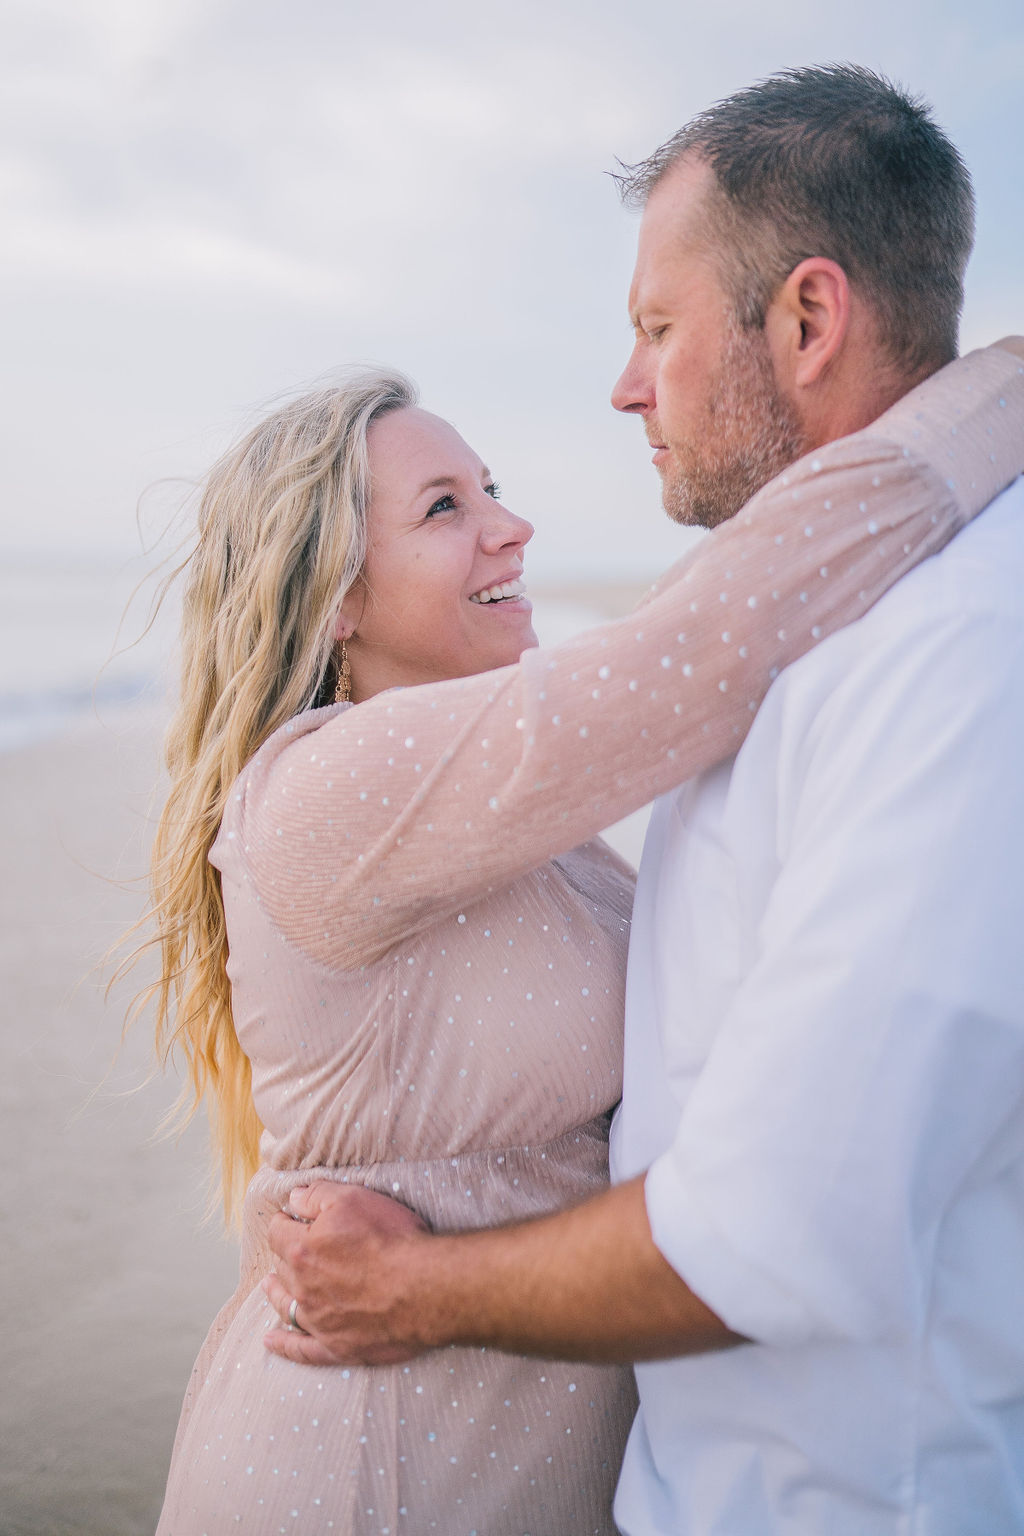 woman has her arms around mans neck, smiling at him as he embraces her waist. Maternity session at the Outerbanks.